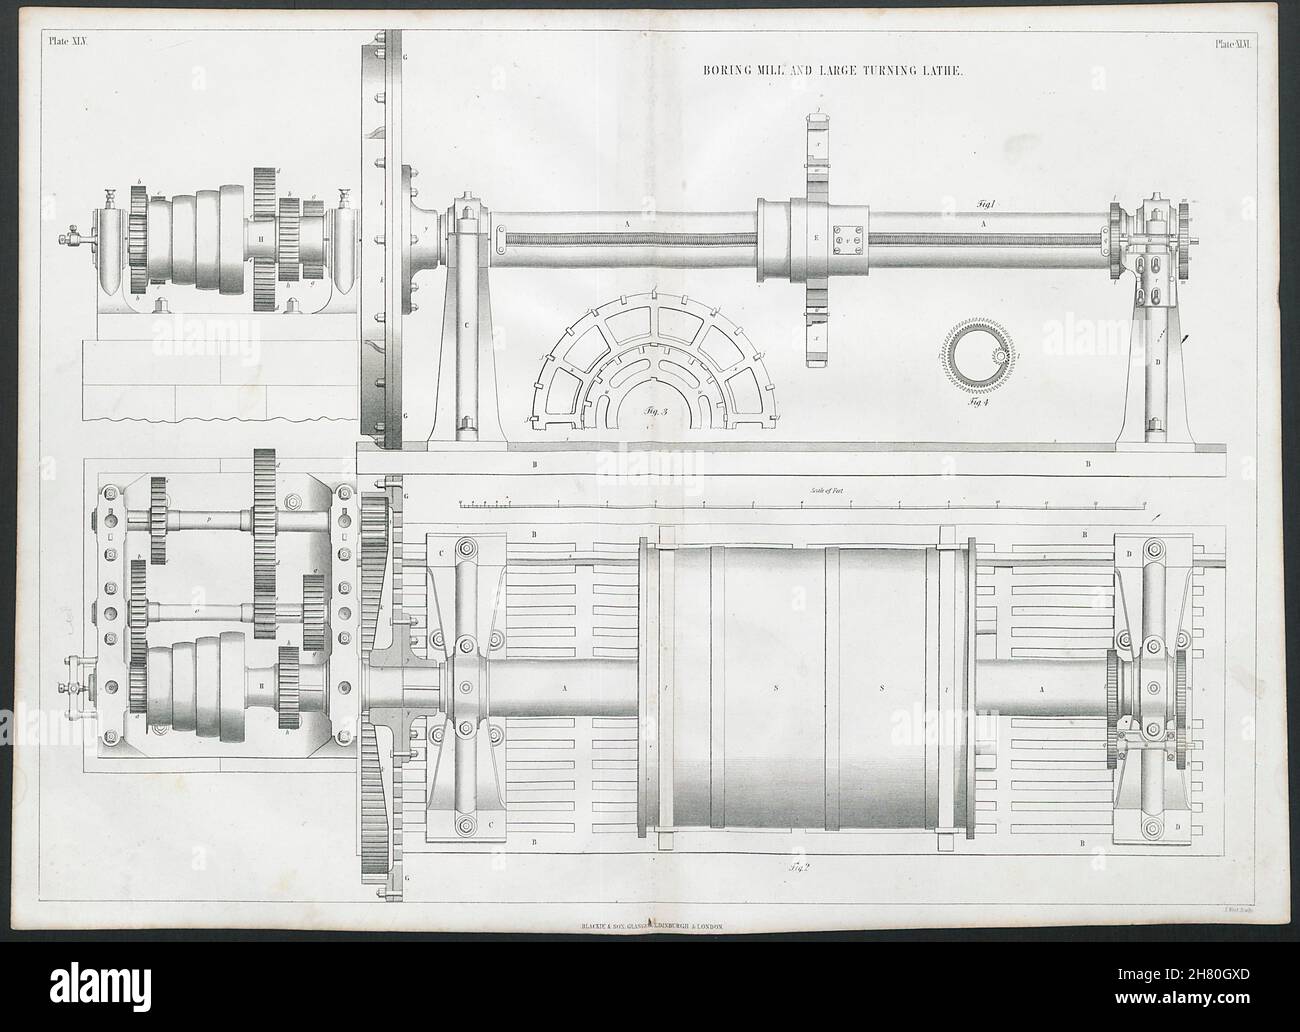 VICTORIAN ENGINEERING DRAWING Boring mill and large turning lathe 1847 print Stock Photo